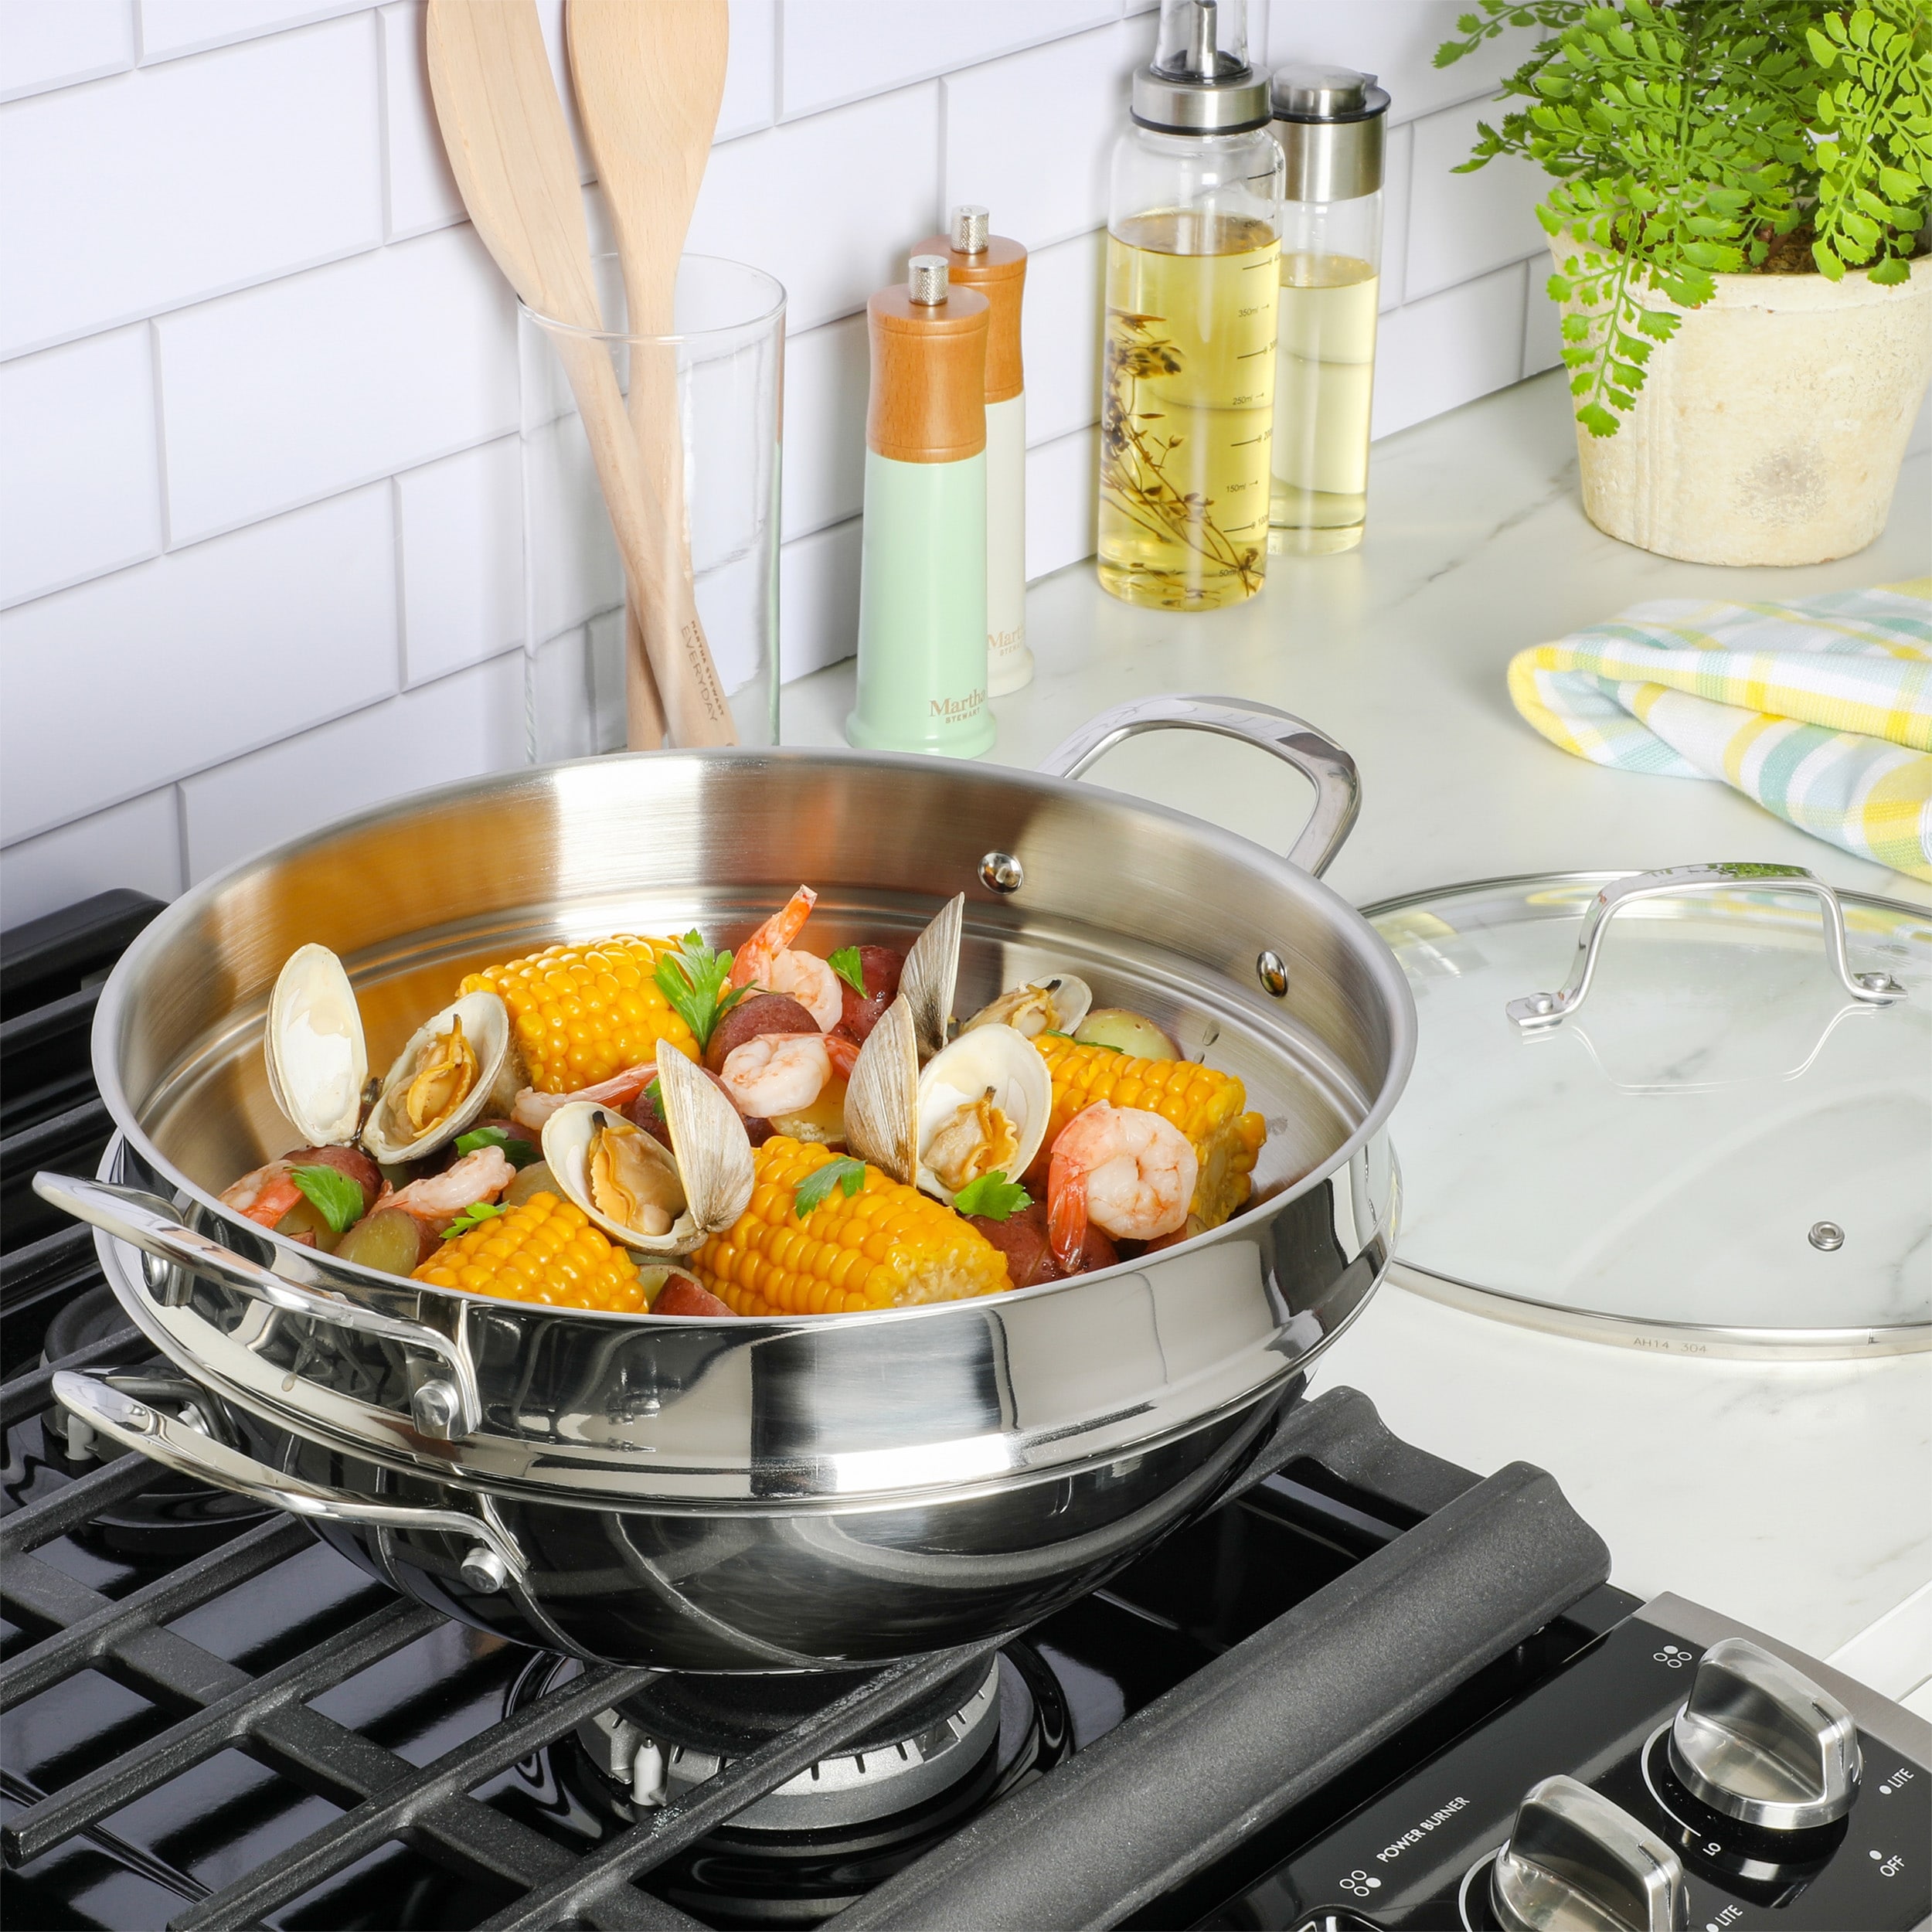 https://ak1.ostkcdn.com/images/products/is/images/direct/03e7247afa4e232cd88c4f954614076ee68f5698/Martha-Stewart-Castelle-12-Inch-SS-Everyday-Pan-with-Steamer-and-Lid.jpg